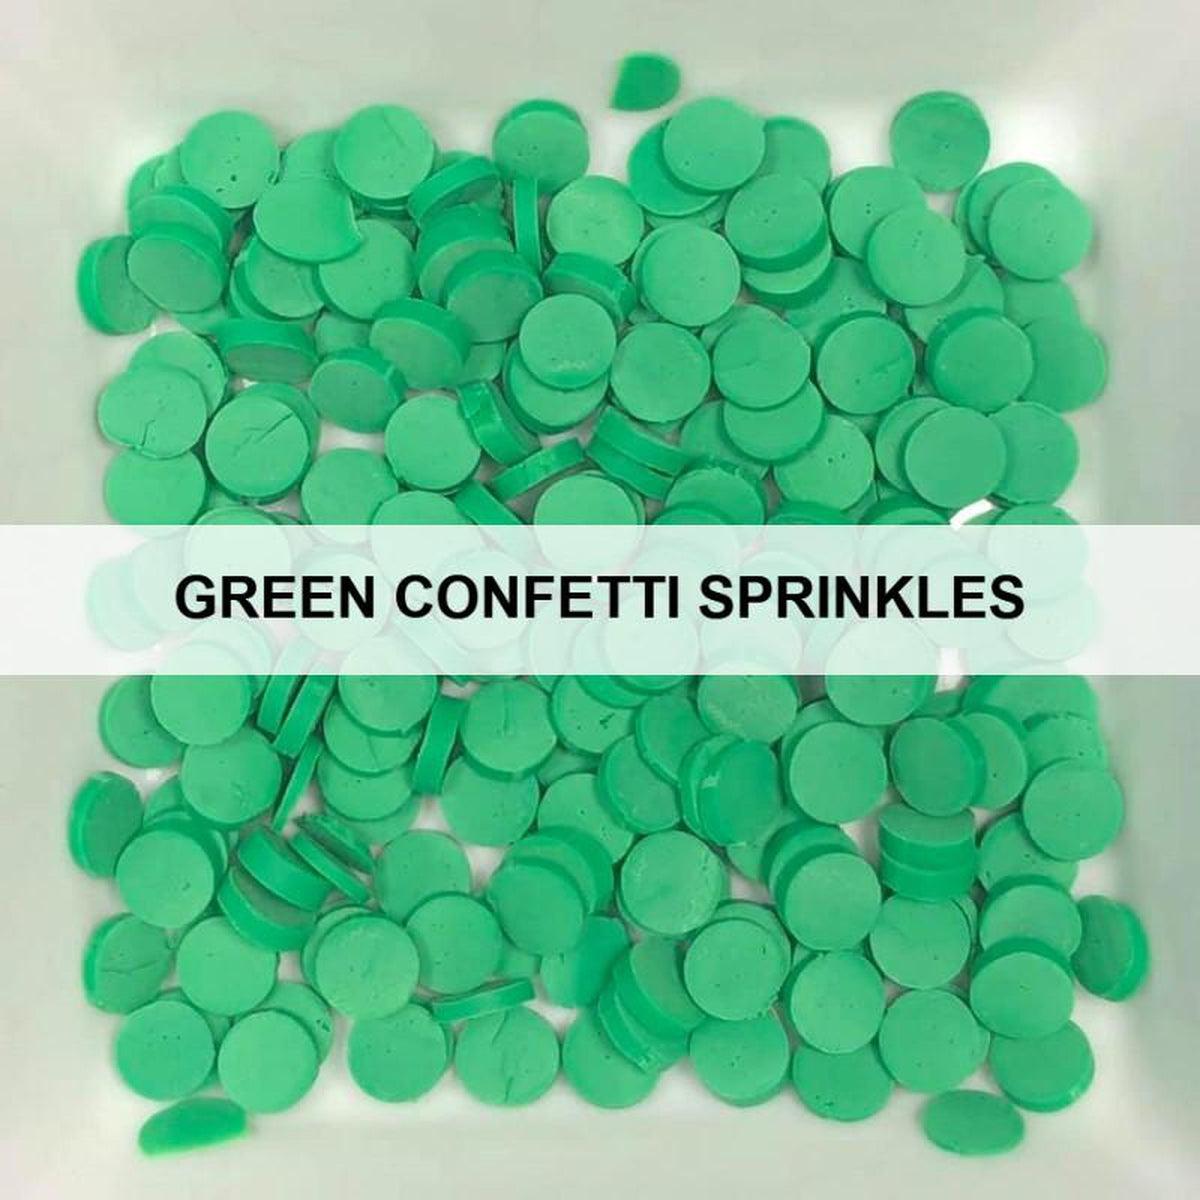 Green Confetti Sprinkles by Kat Scrappiness - Kat Scrappiness